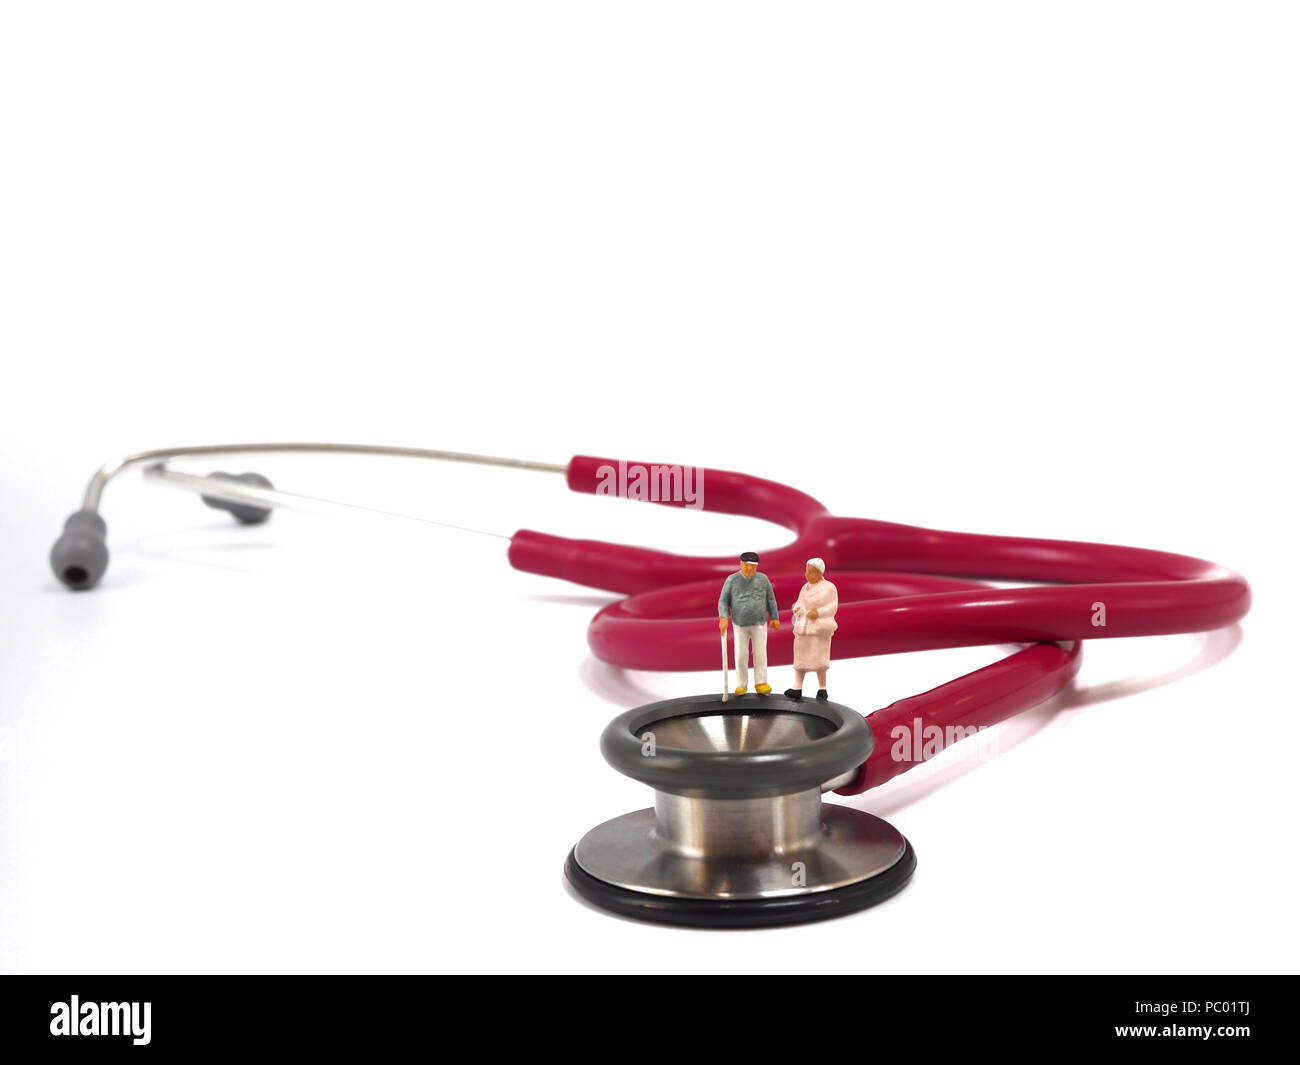 Miniature senior couple, small figures, standing on stethoscope. Health care and healthy lifestyle concept. Stock Photo